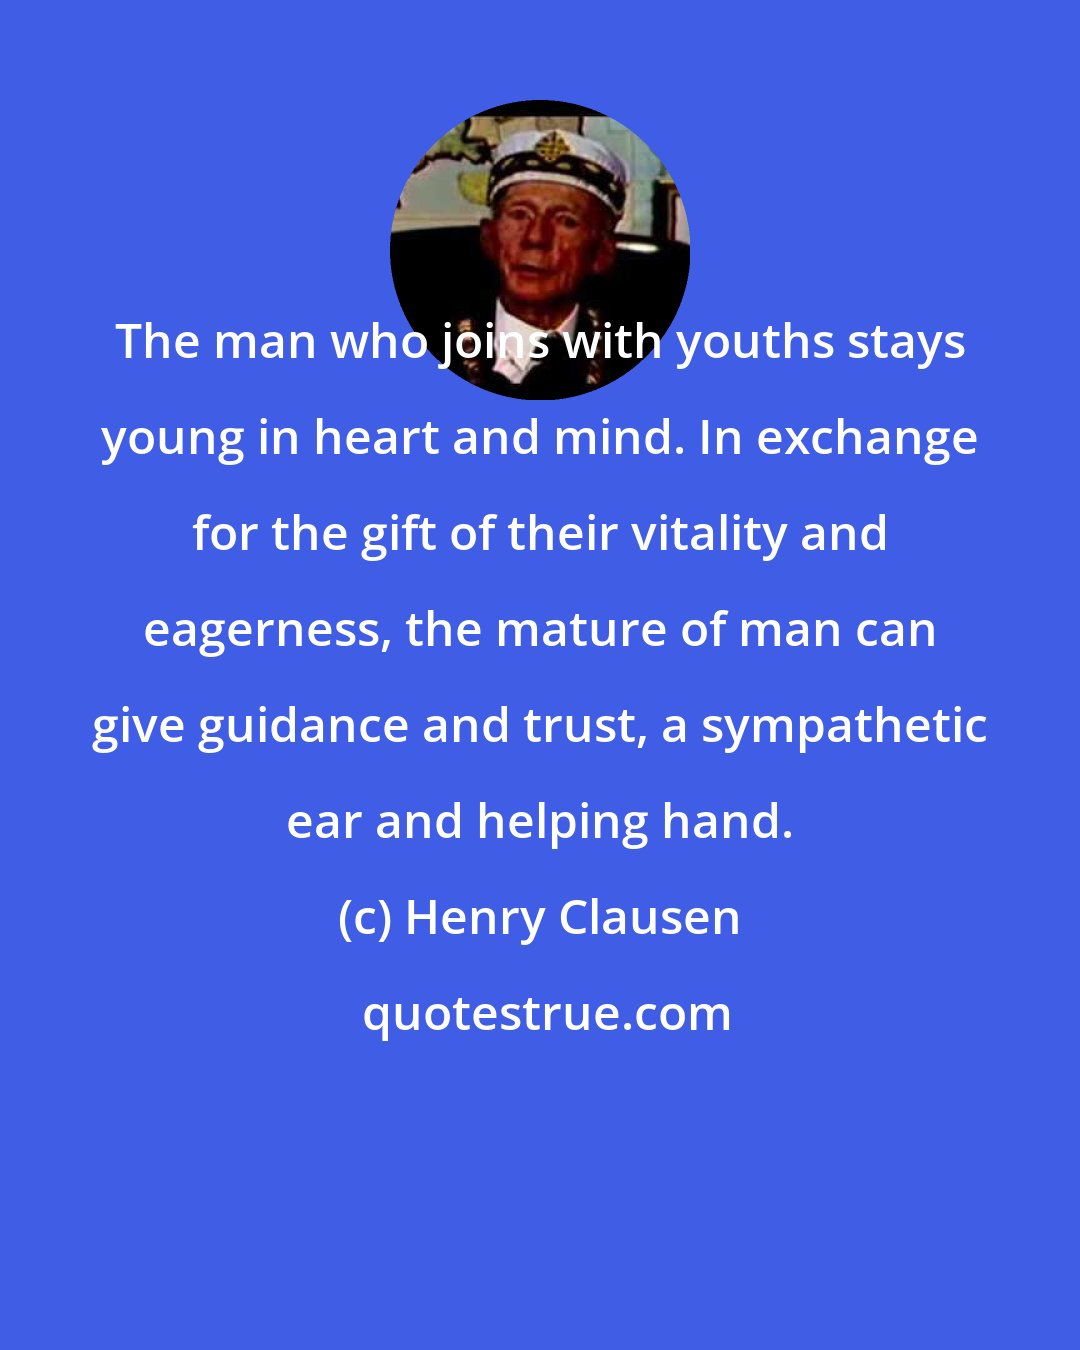 Henry Clausen: The man who joins with youths stays young in heart and mind. In exchange for the gift of their vitality and eagerness, the mature of man can give guidance and trust, a sympathetic ear and helping hand.